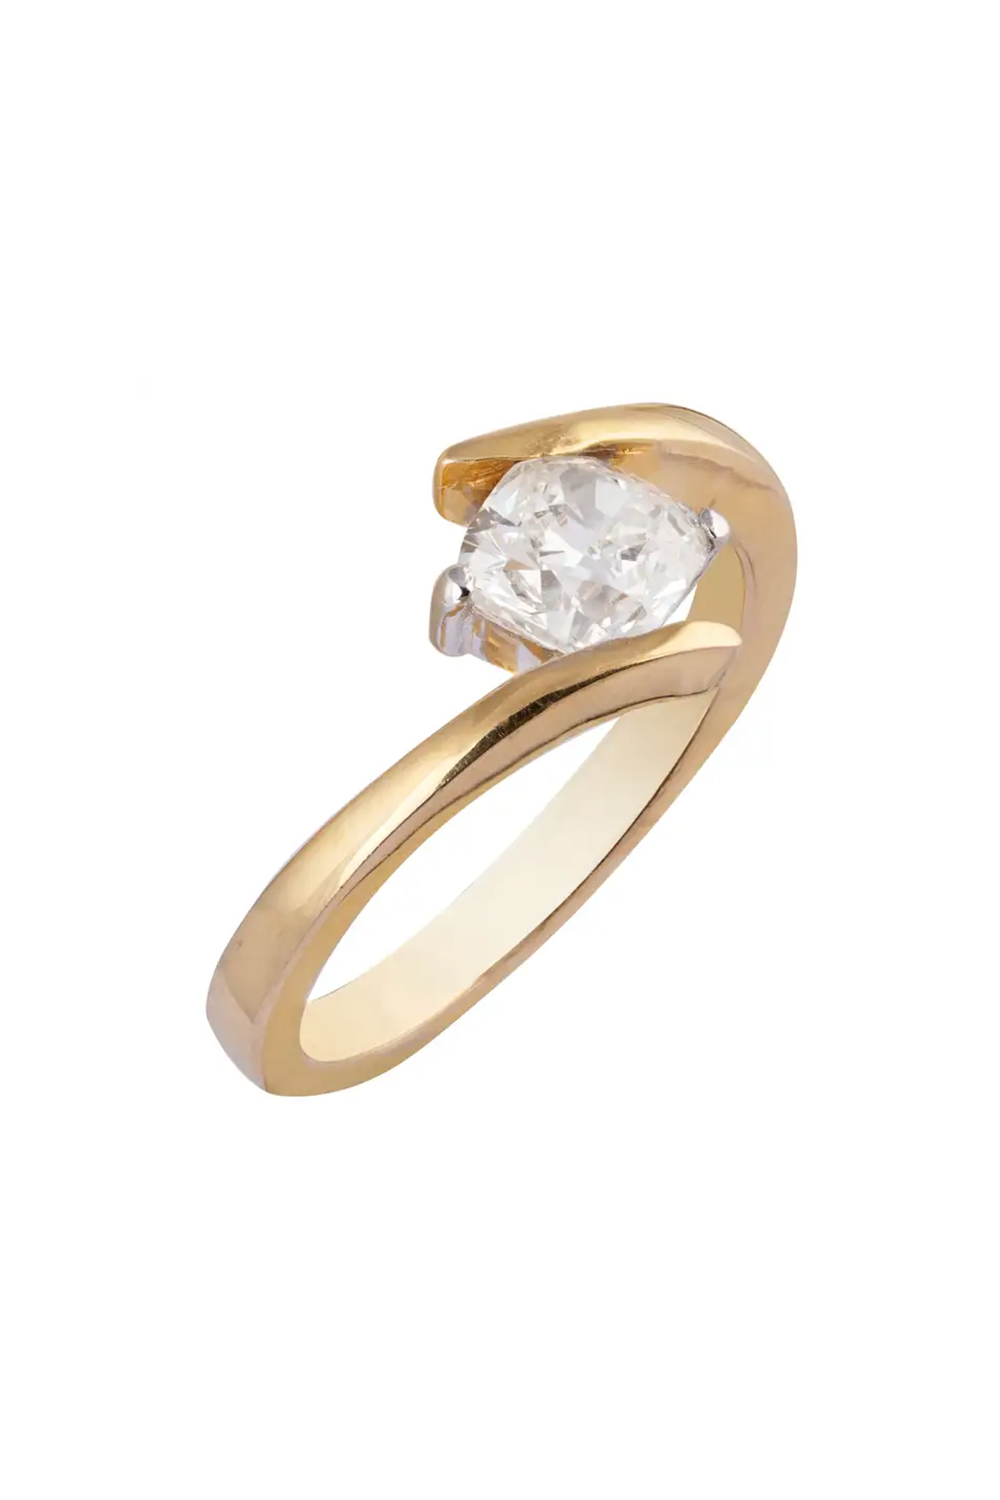 1.06cts Diamond Solitaire princess cut gold Ring